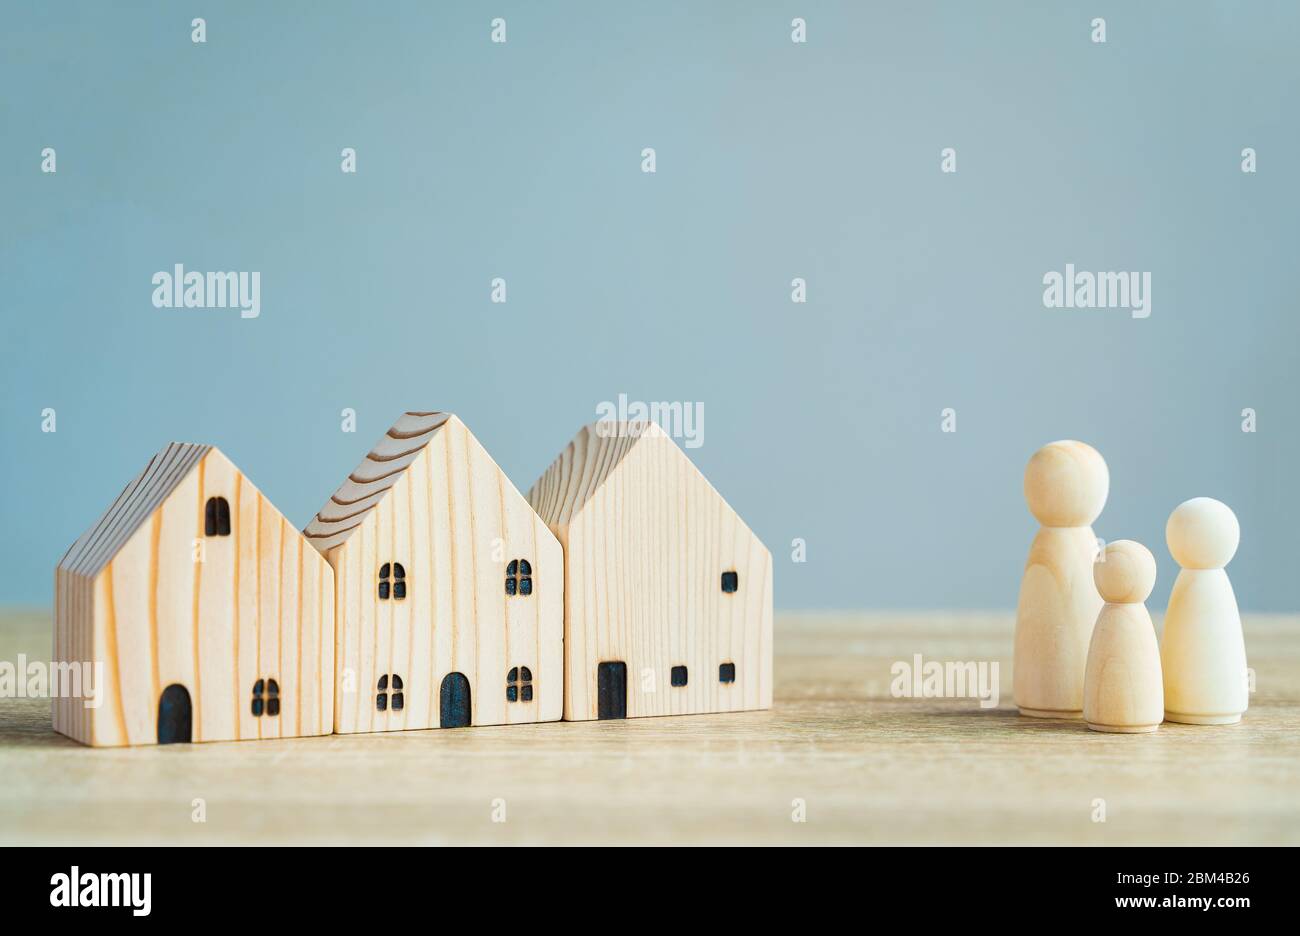 Money savings concepts. Wooden house models with family wooden dolls in meaning about saving money to buy a house, refinancing, investment or financia Stock Photo